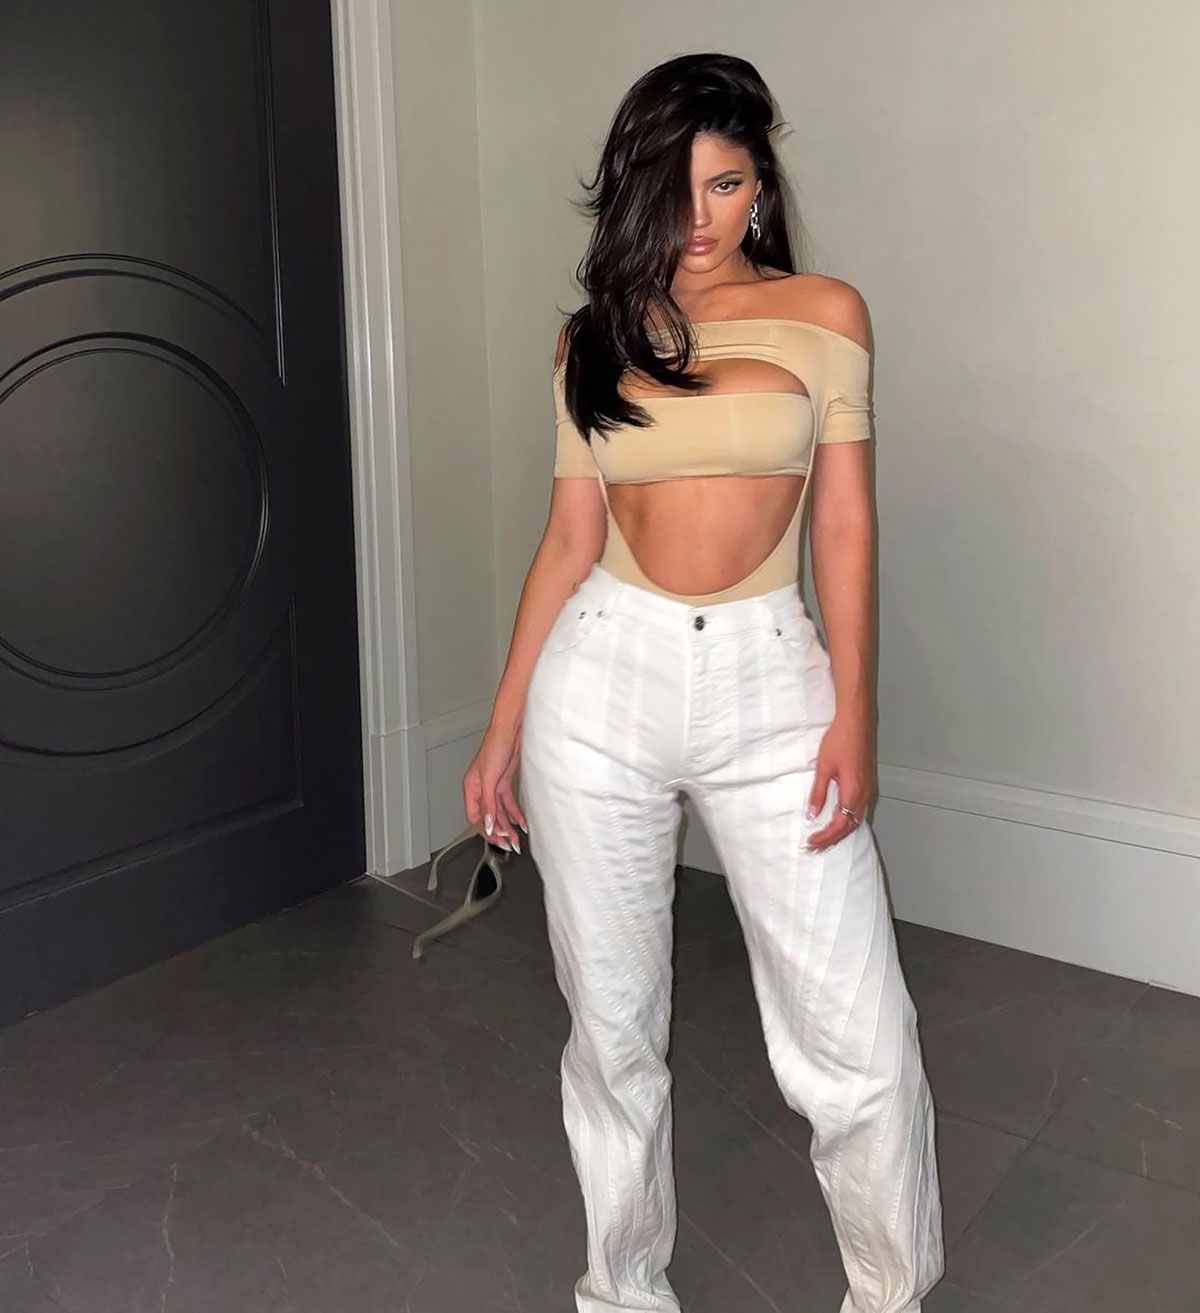 Kylie Jenner Matches Outfits to People, Cars and Other